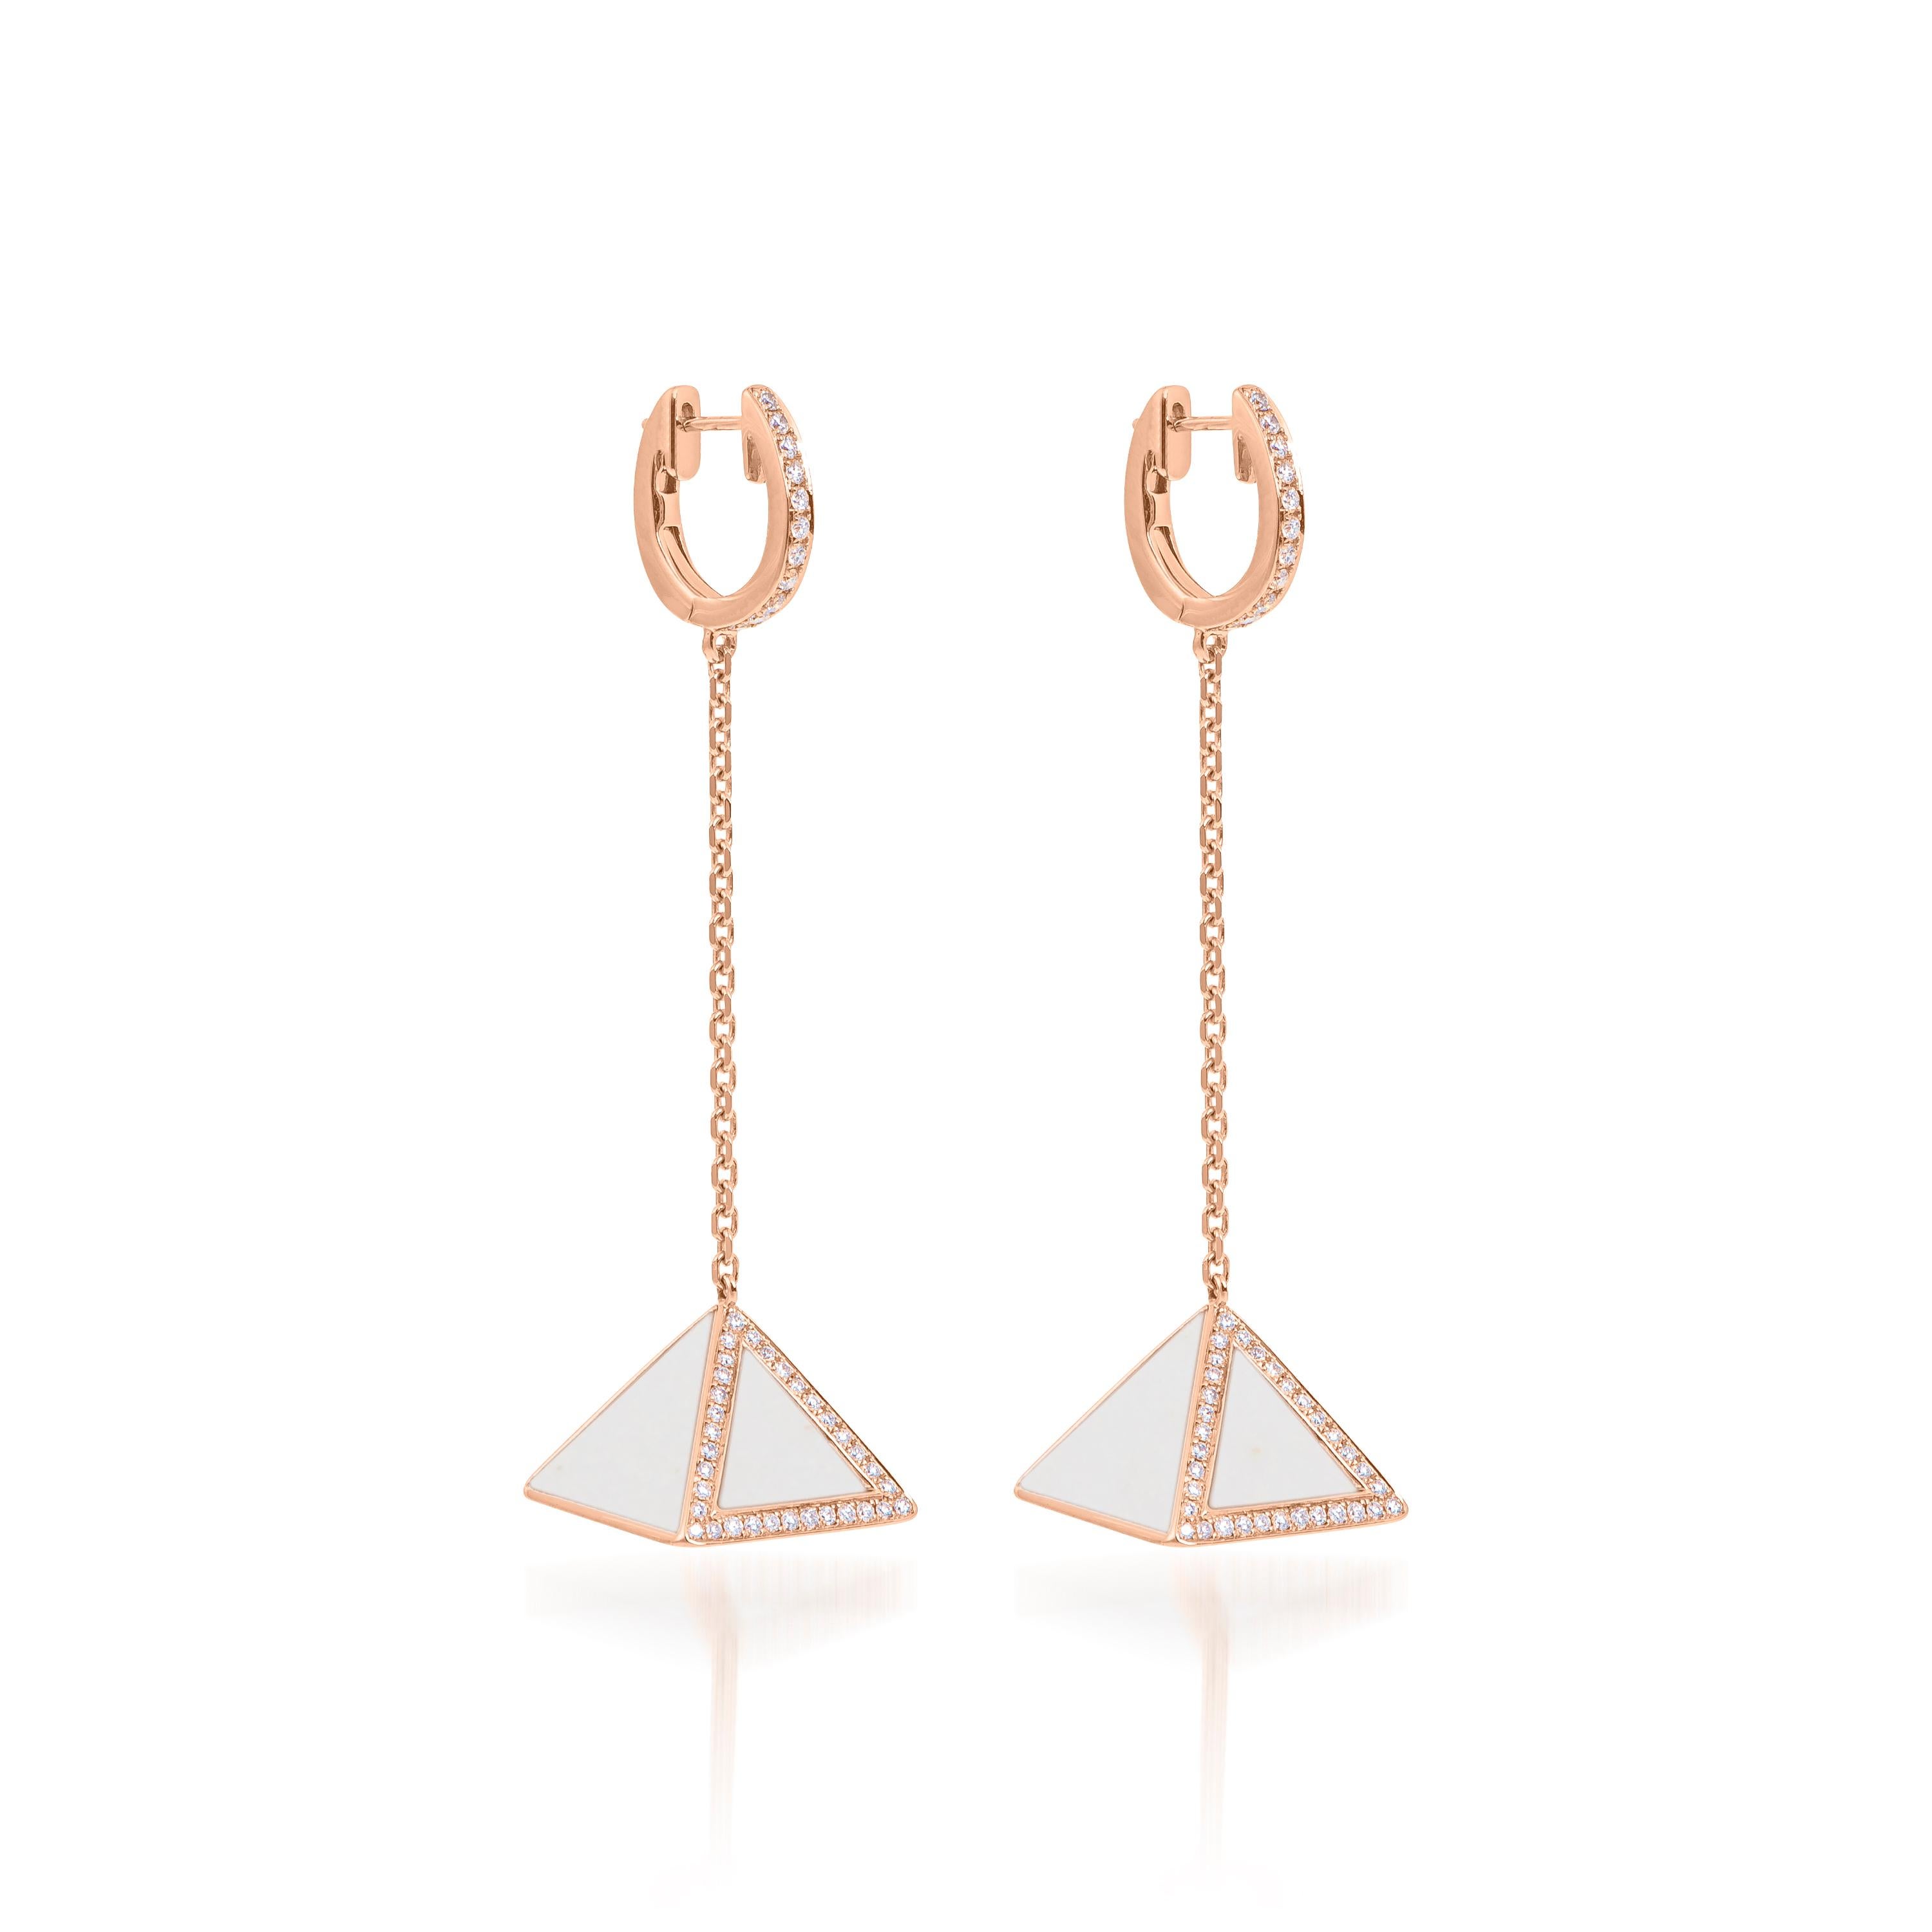 Tetra Tribus Earrings with White Agate and Diamonds in 18K Rose Gold